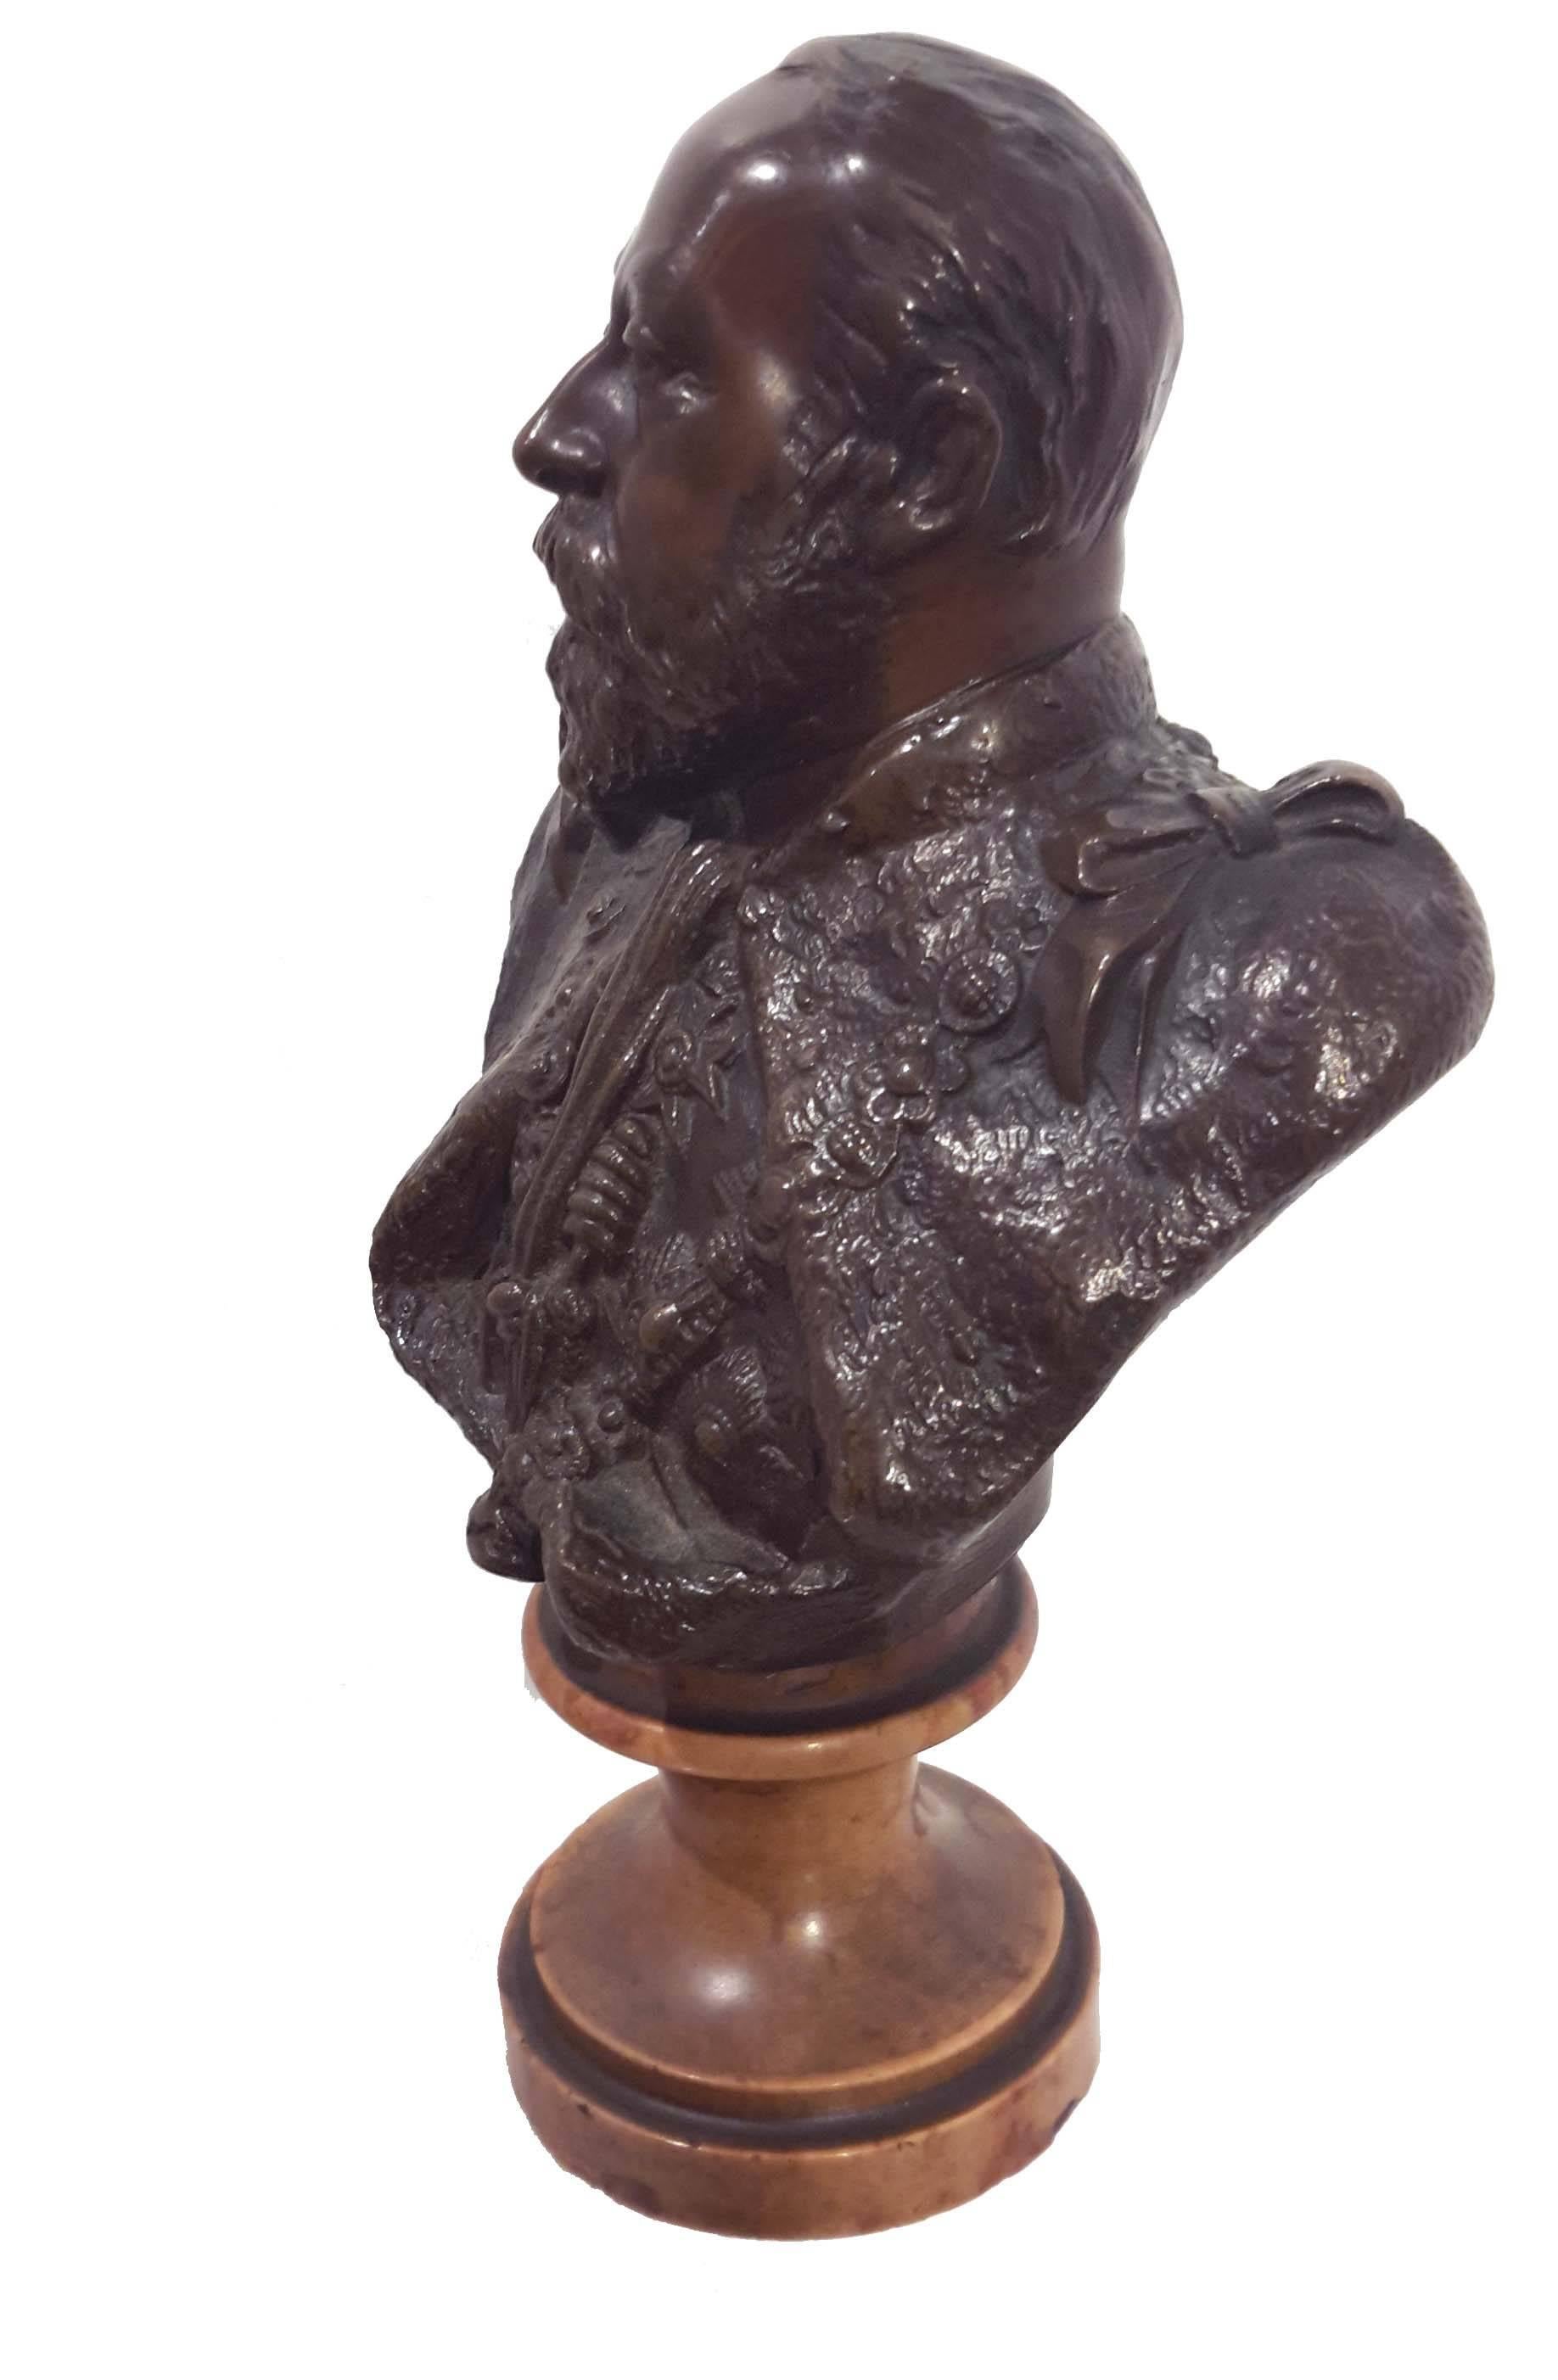 Bronze bust of King George V on marble base, 19th century. Cast and patinated bronze with great details.